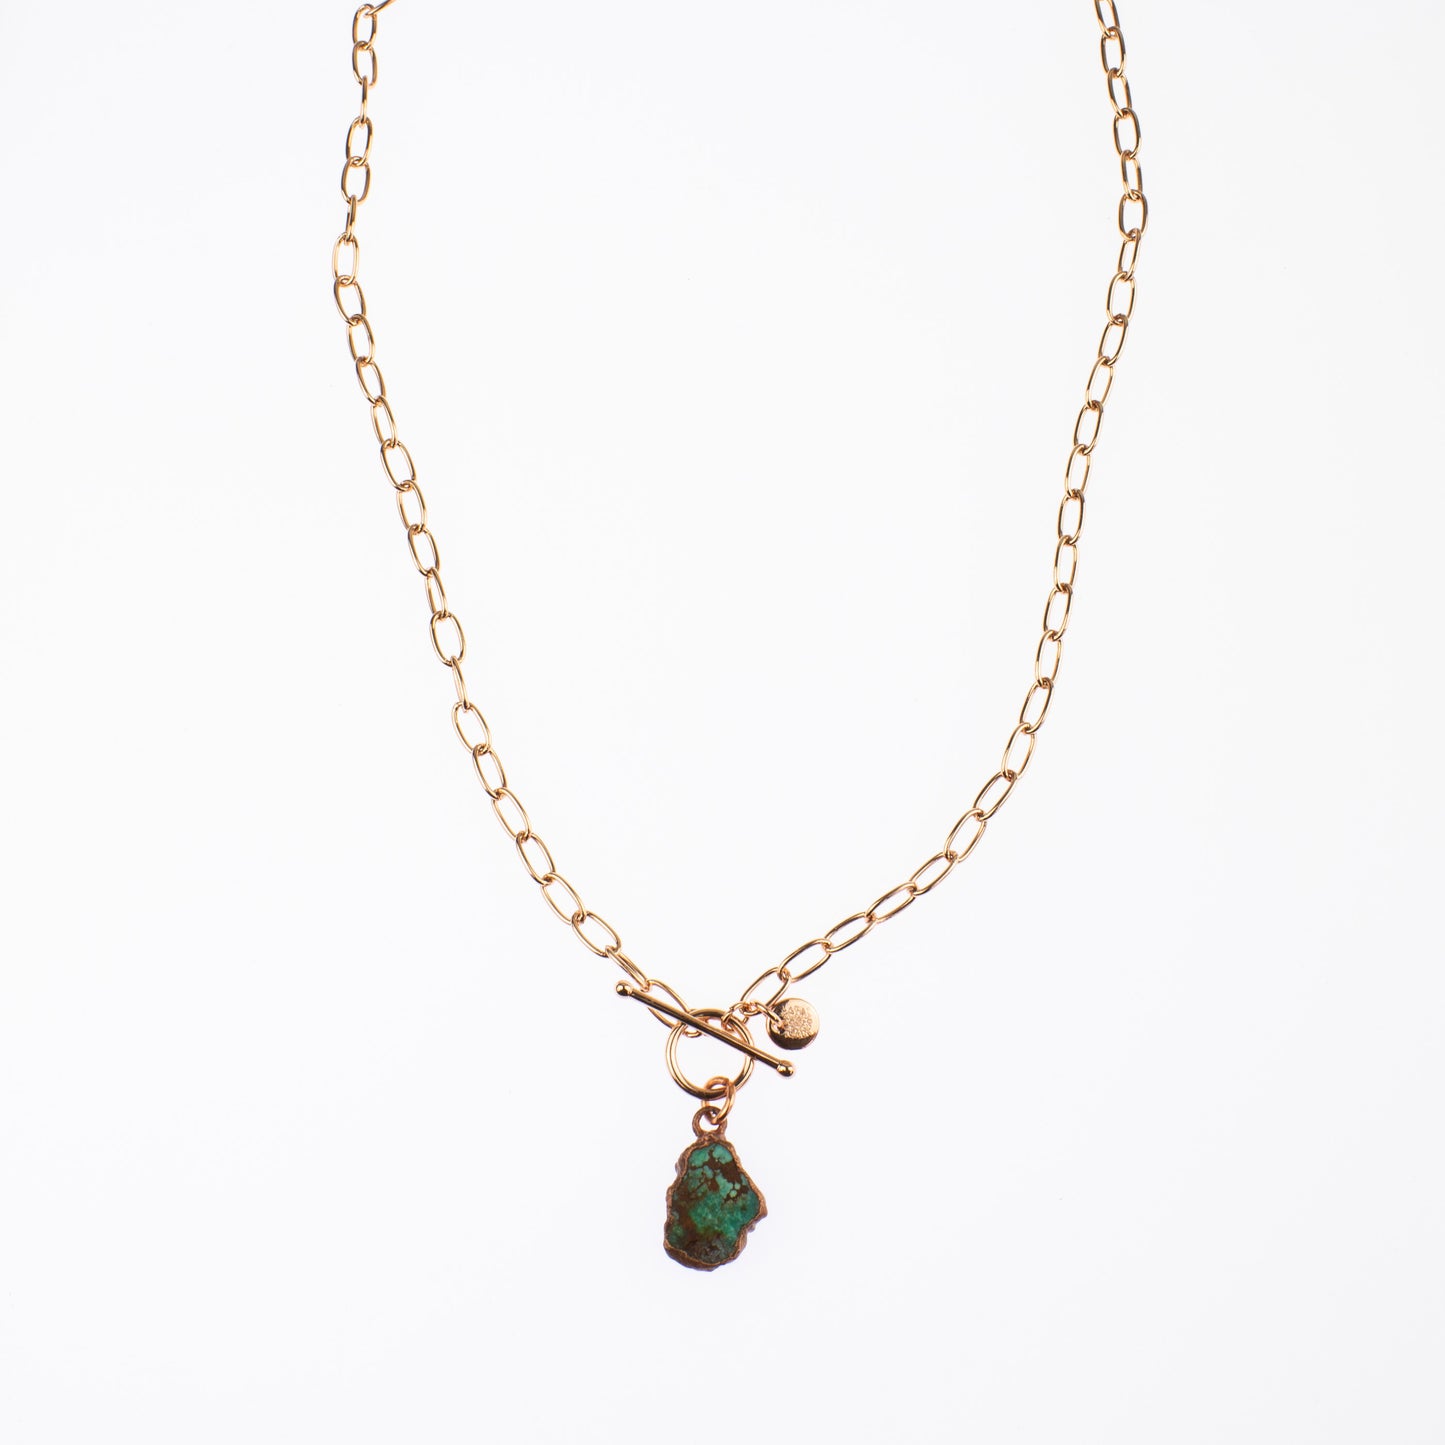 Large Turquoise Toggle Clasp Necklace